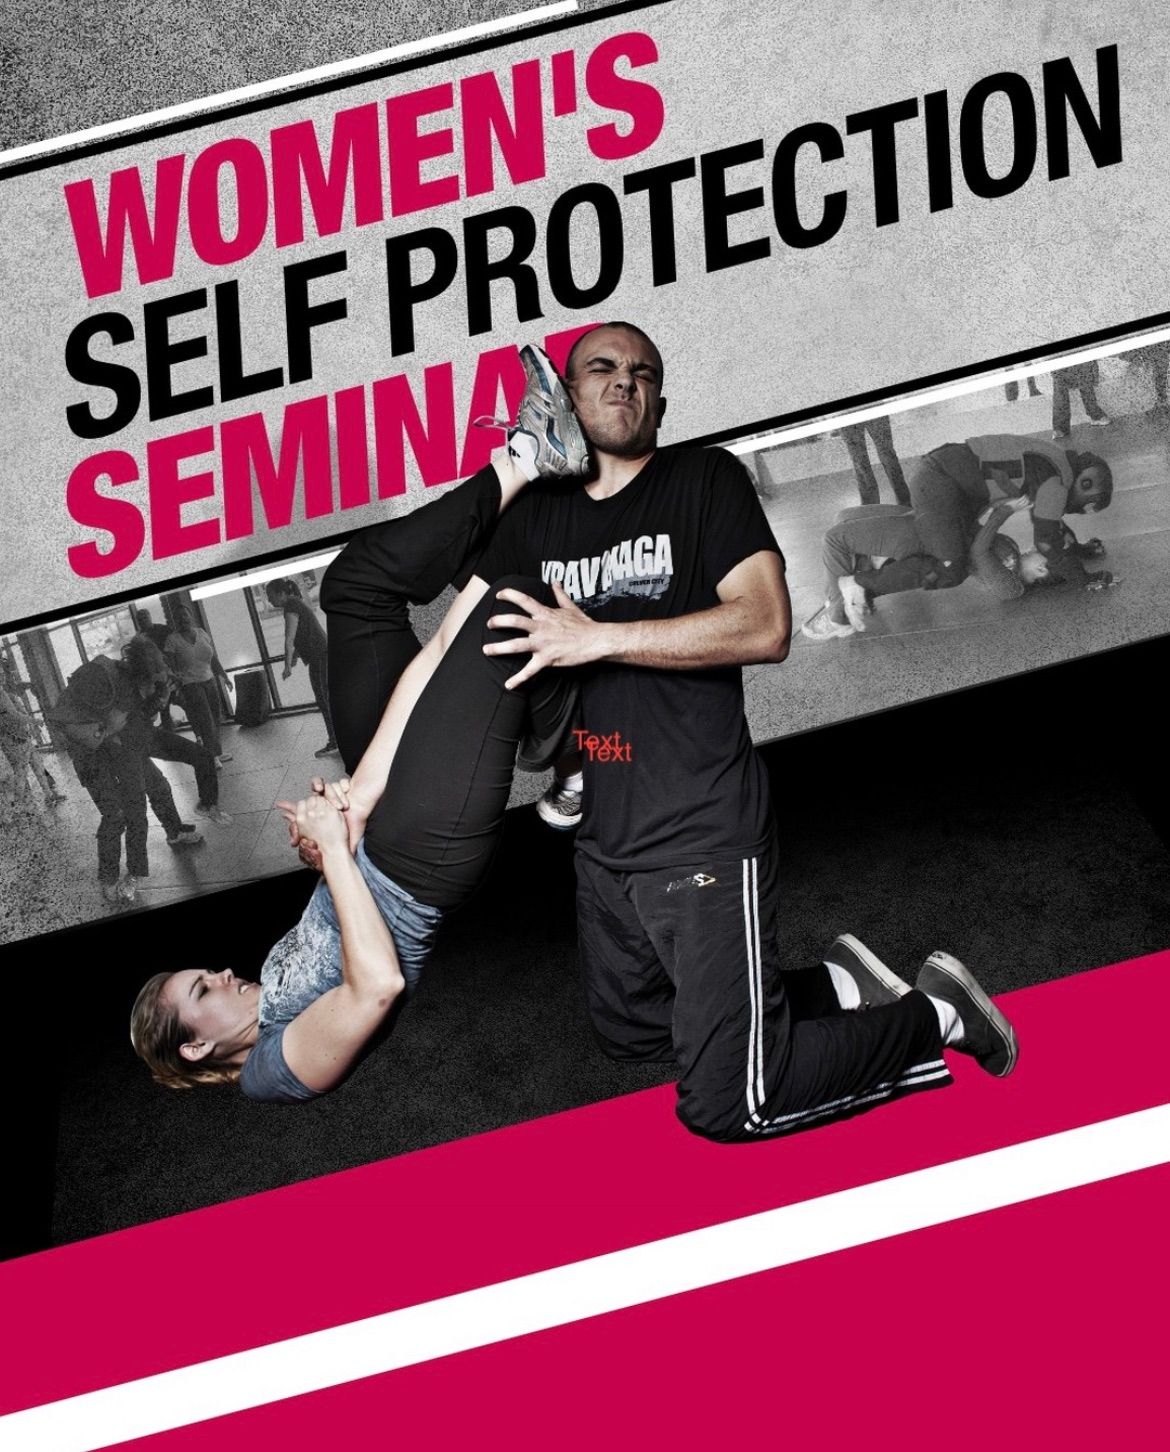 Women only self protection seminar 